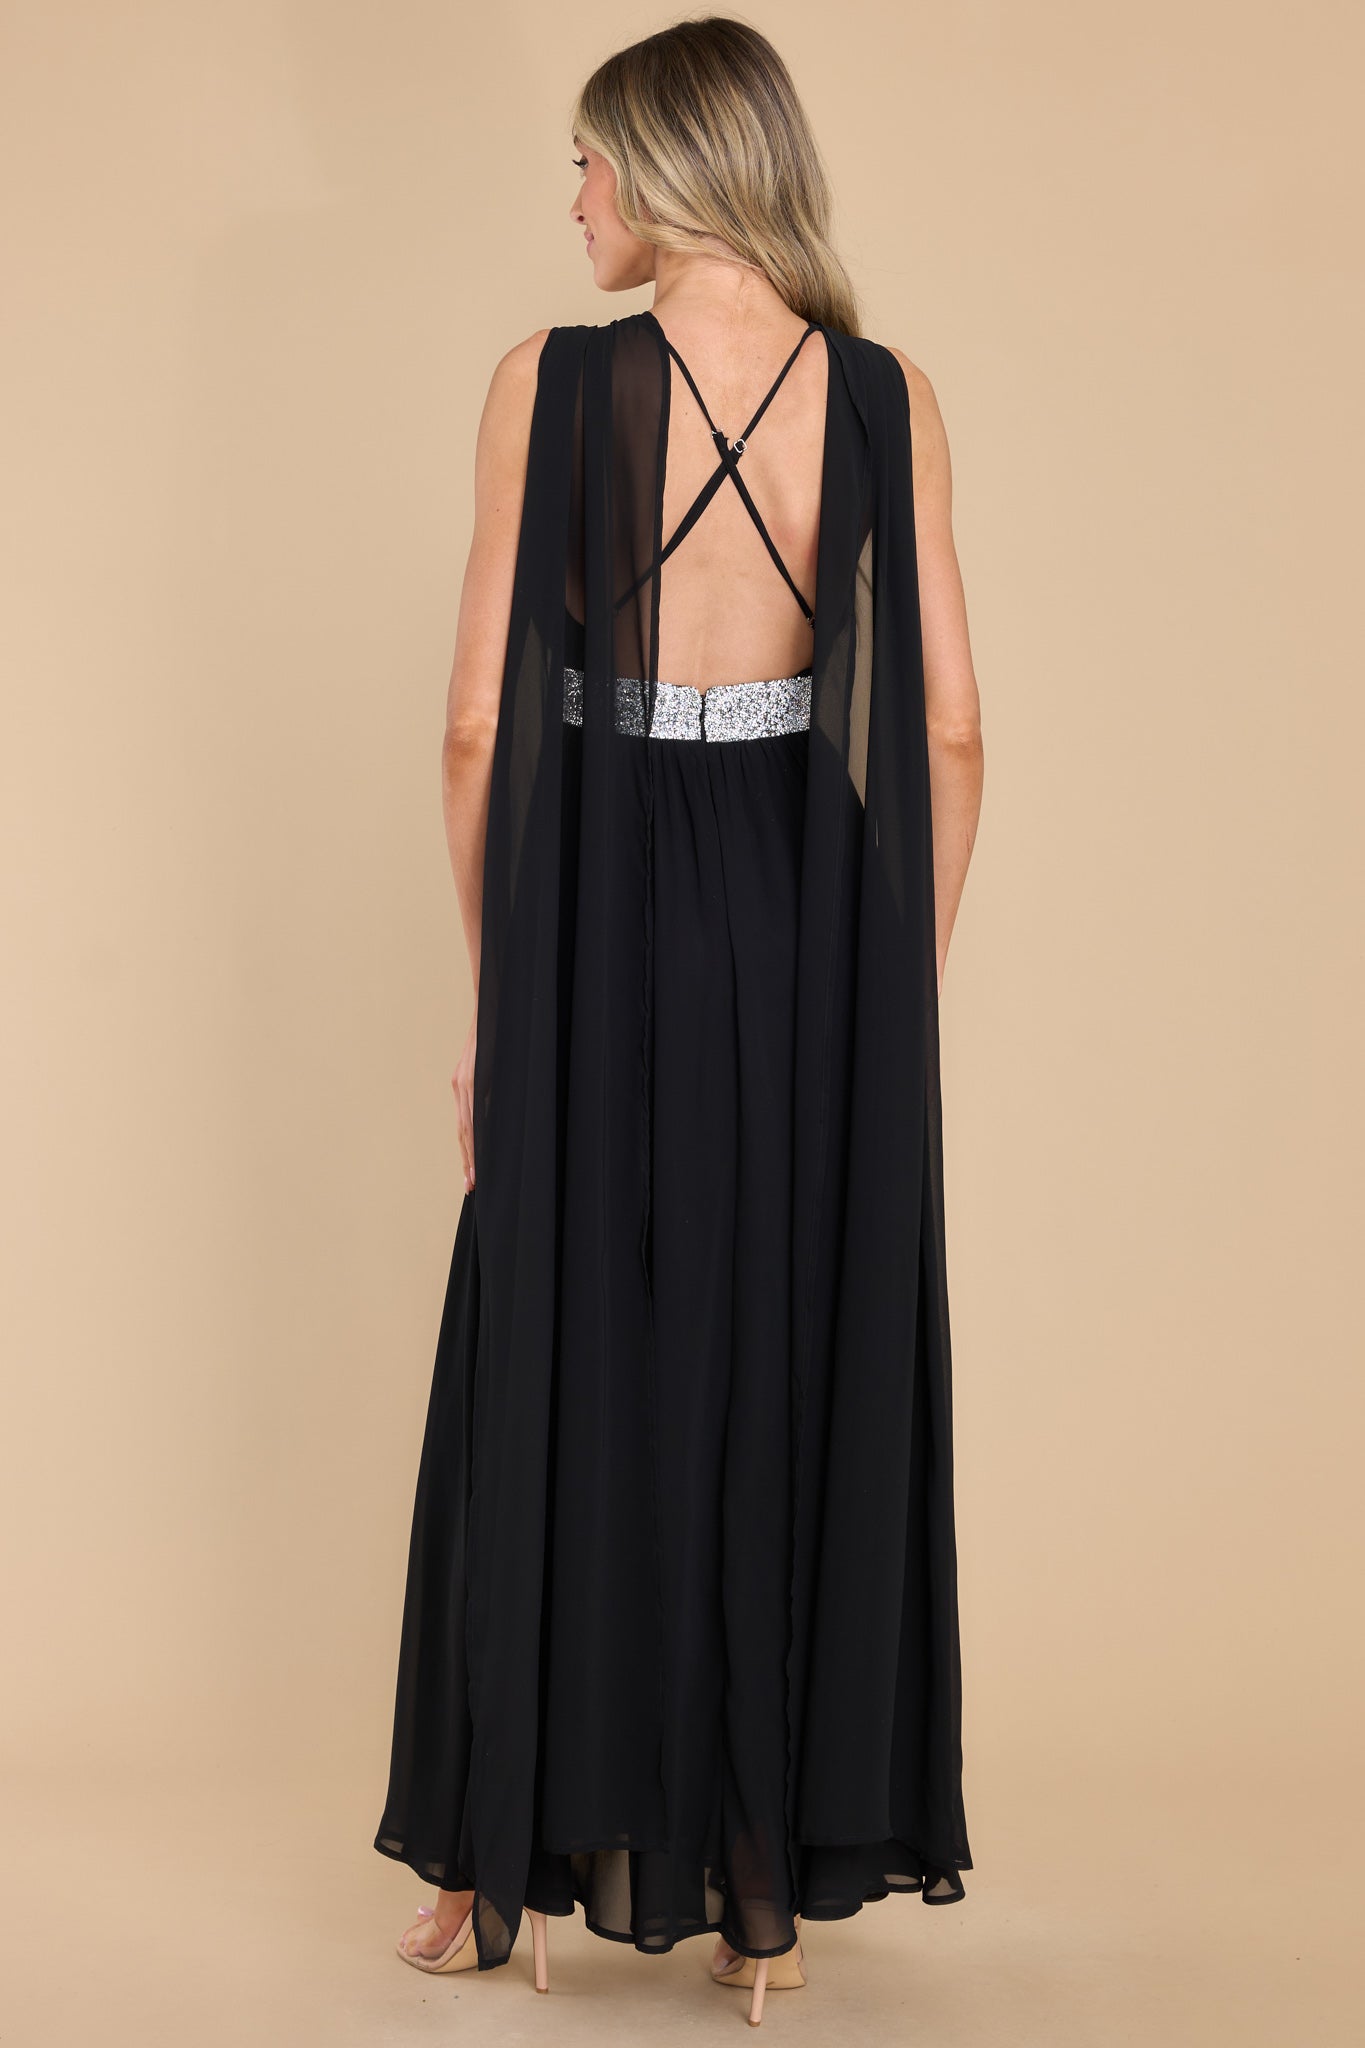 Black Halter Backless Maxi Dress With Back Straps – Free From Label